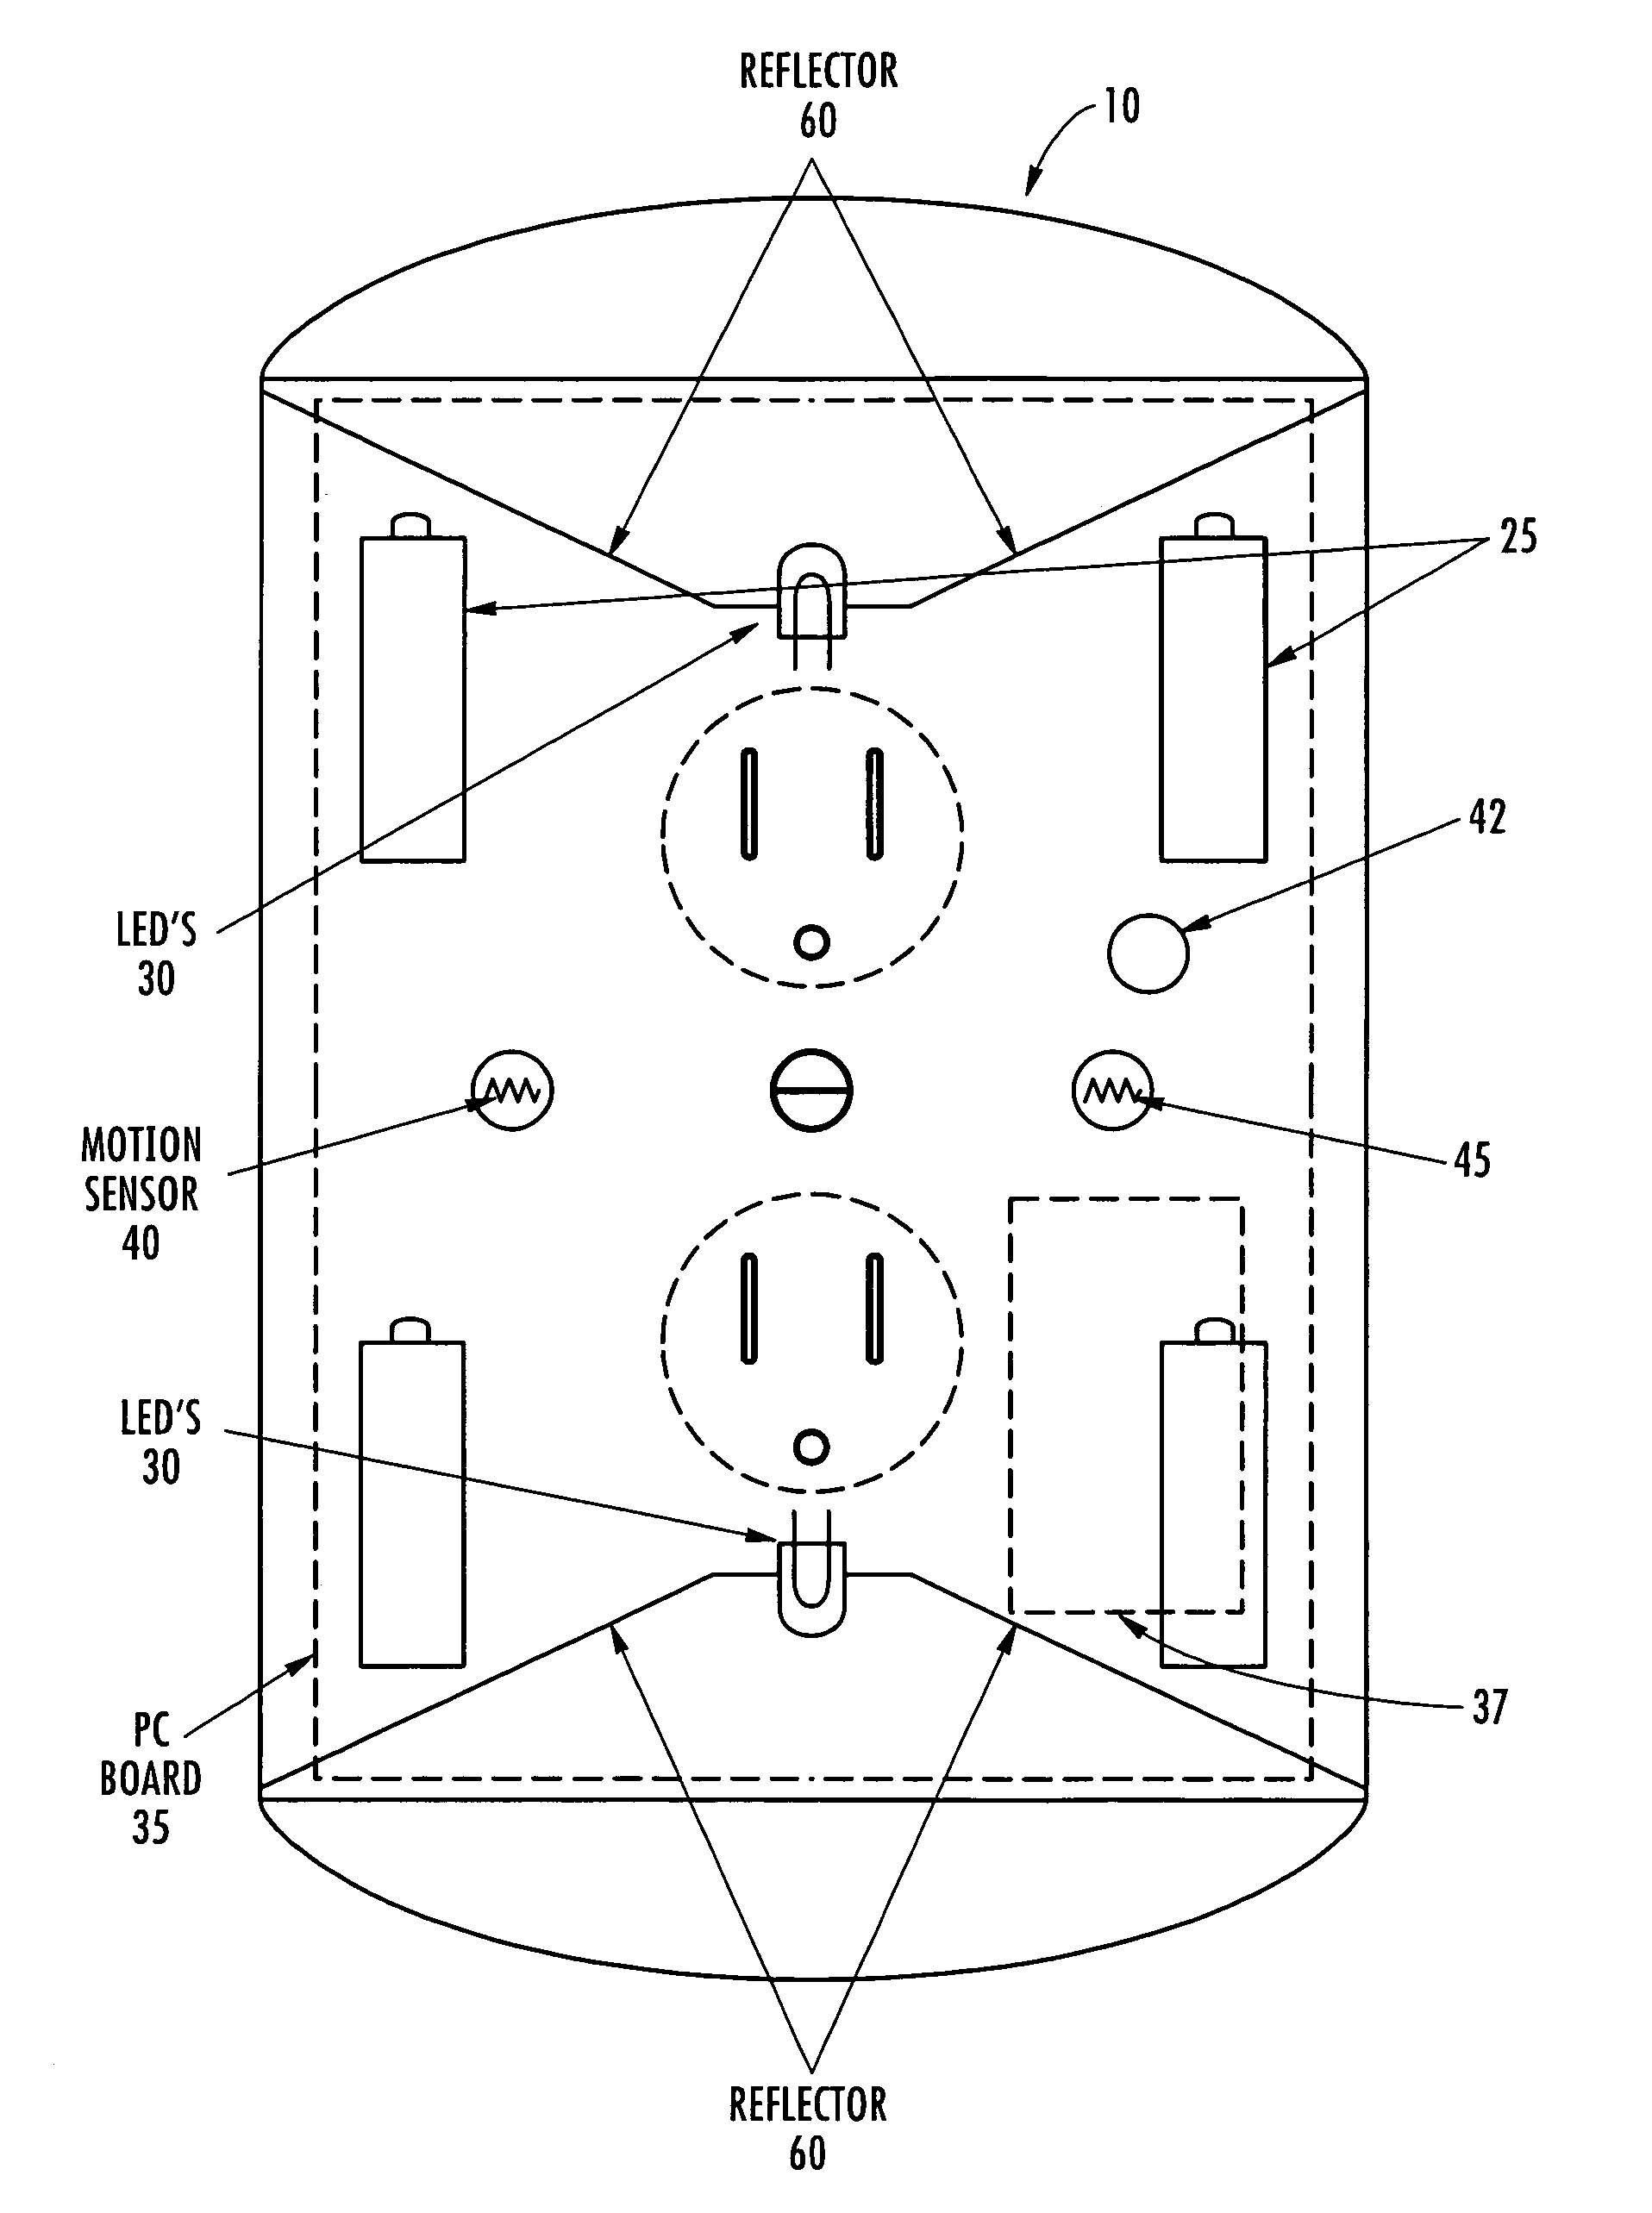 Apparatus and methods for providing emergency safety lighting